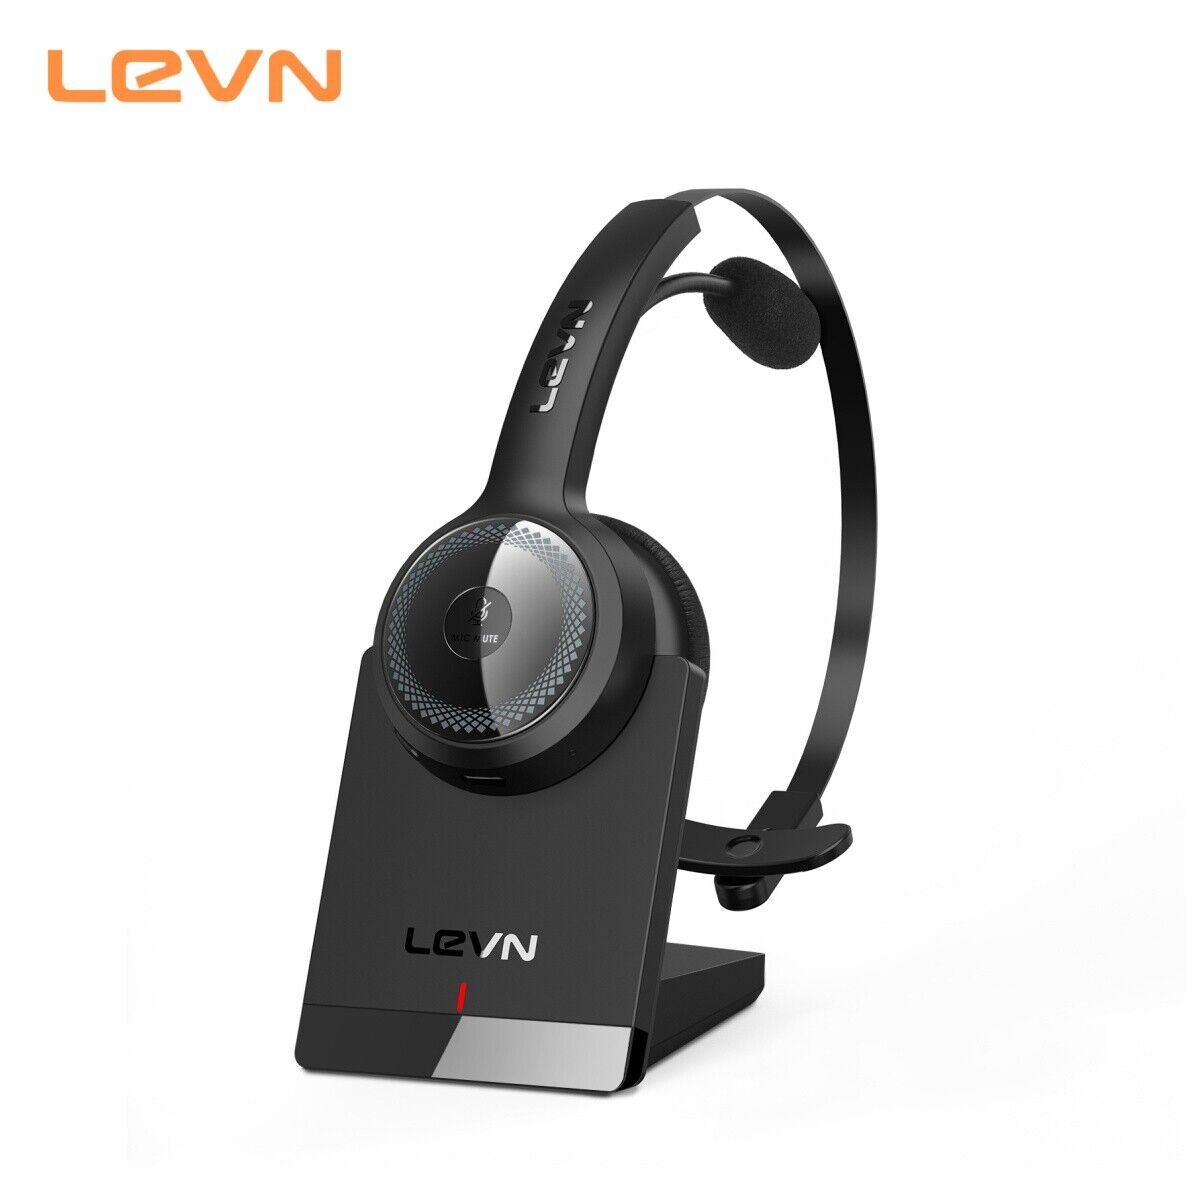 LEVN Bluetooth Headphones, Wireless Headse With Microphone & AI Noise Cancelling